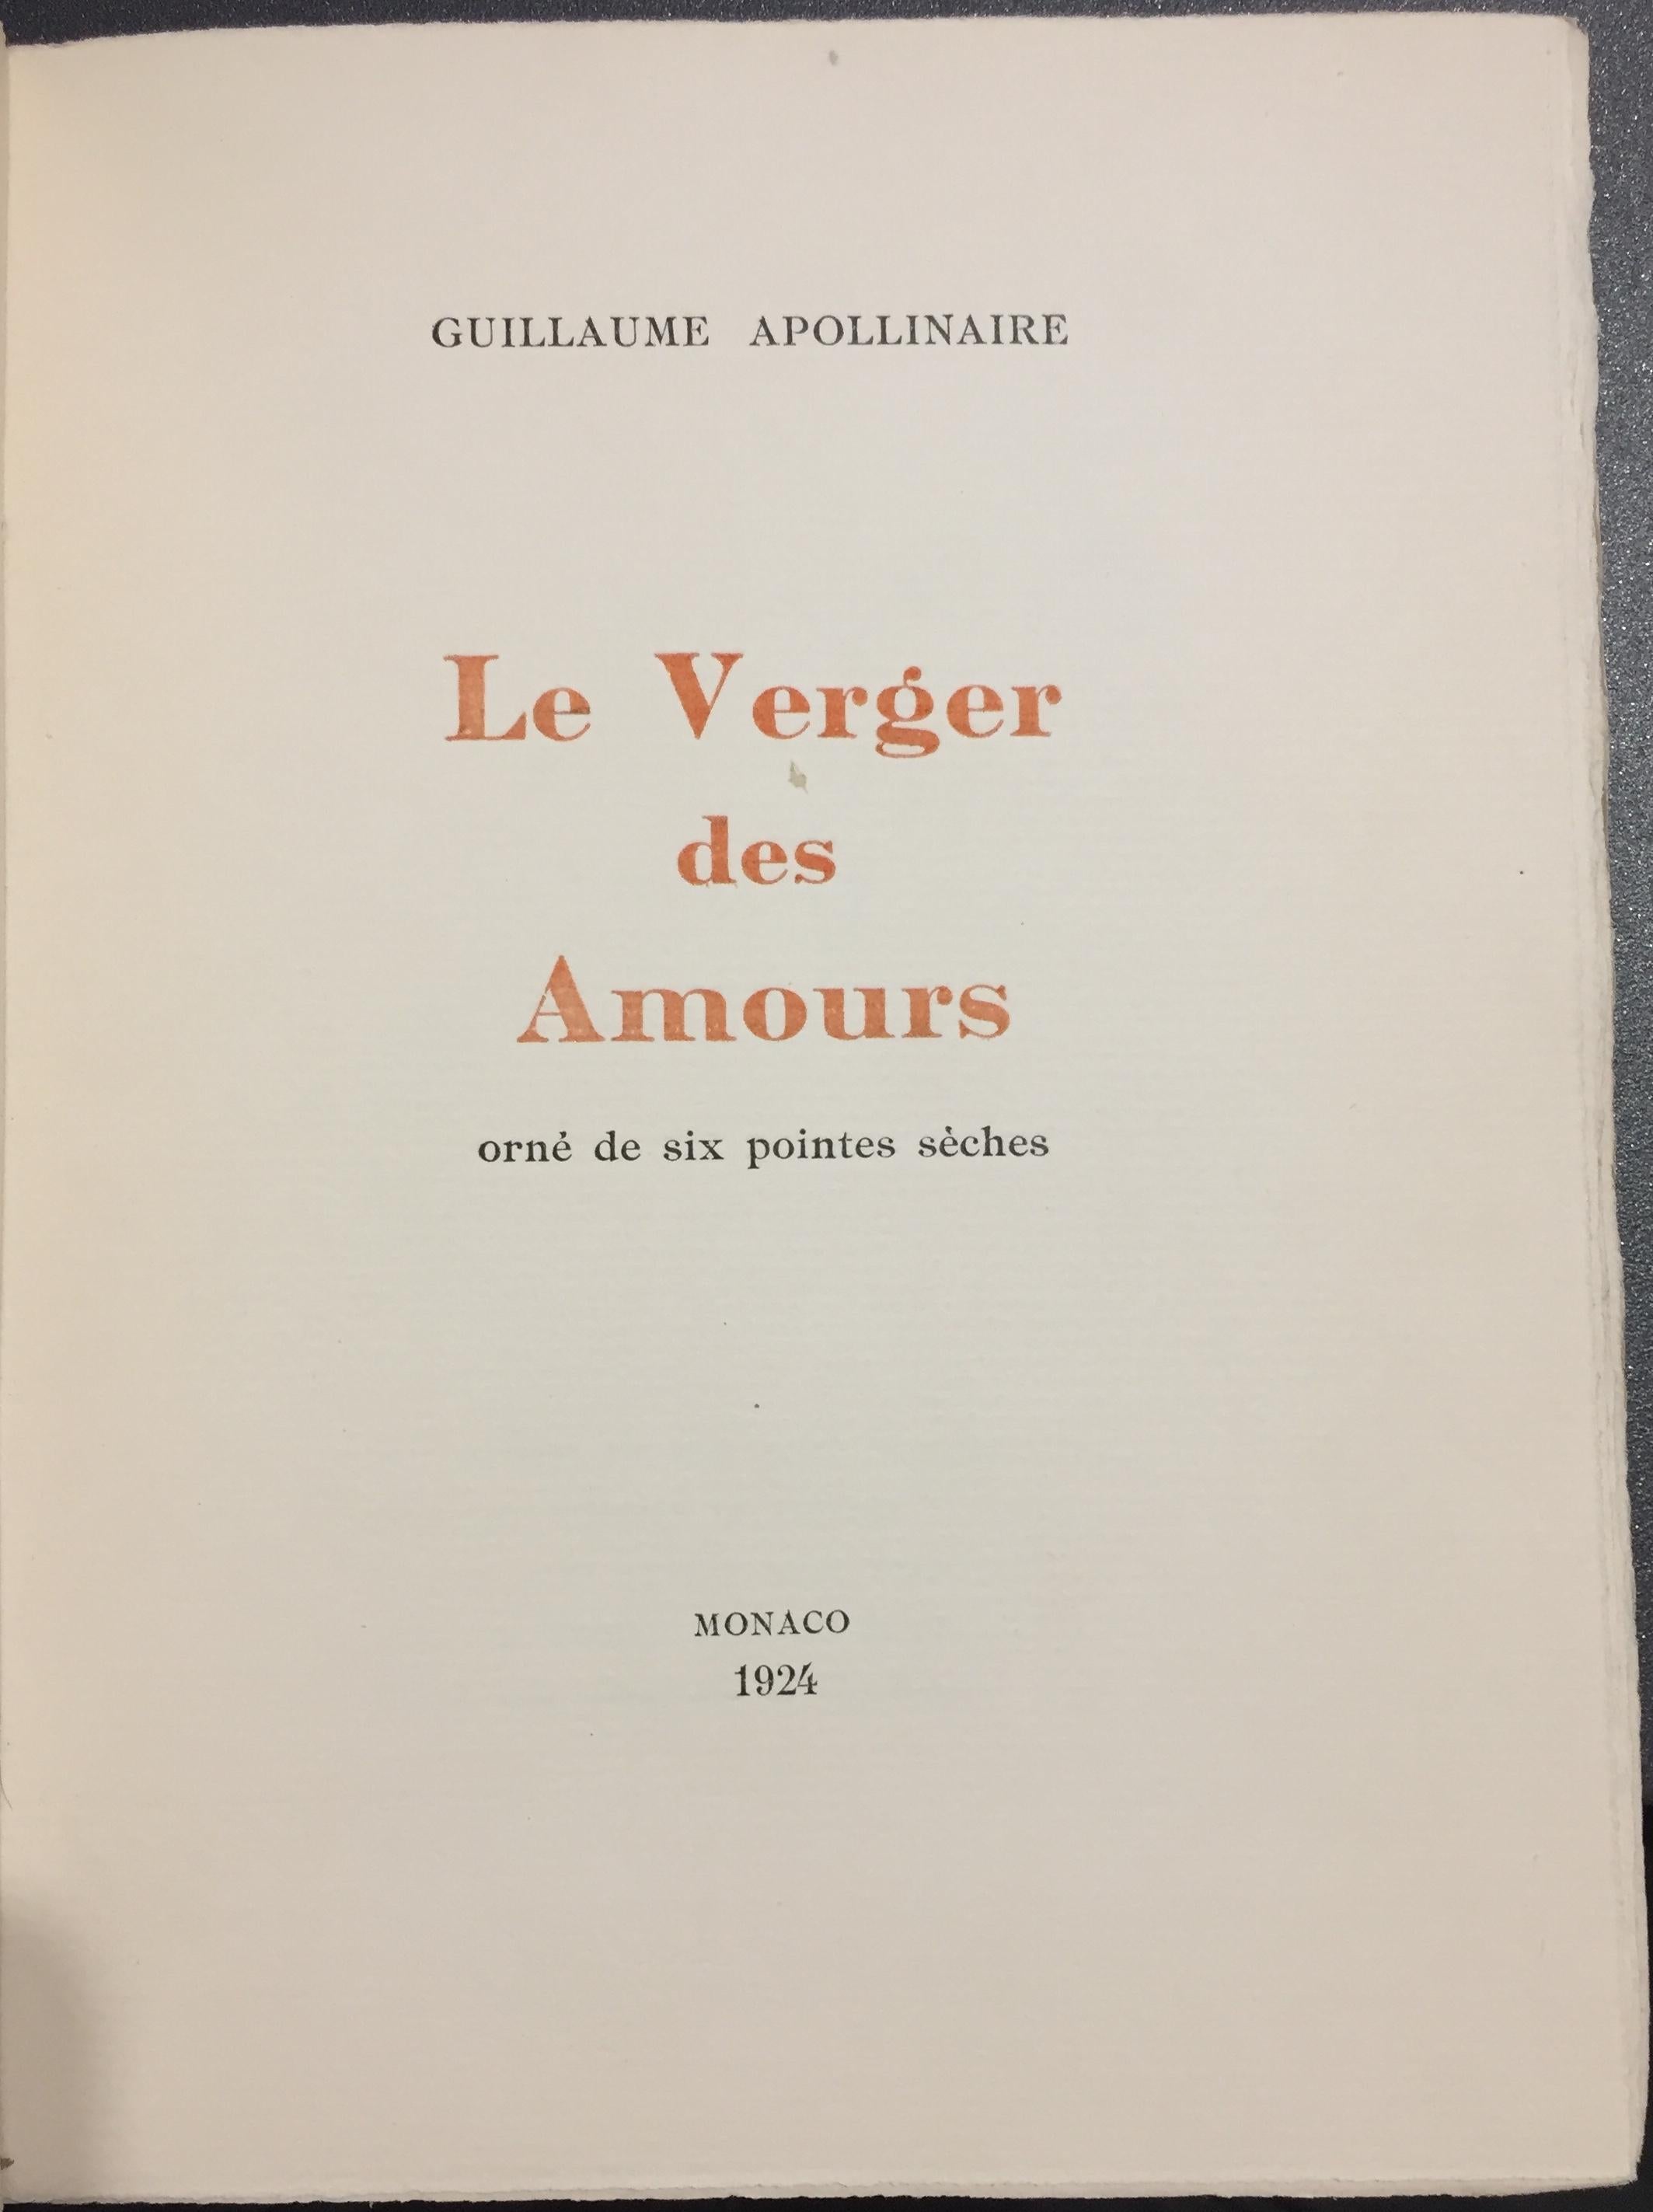 Author of the book is Guillaume Apollinaire. Edition of 100 copies including 6 drypoints (a full page engraving on frontispiece and 5 engravings in text). Copy on Vergé de Rives à la Forme. The engravings (not signed) of this book are by Foujita.